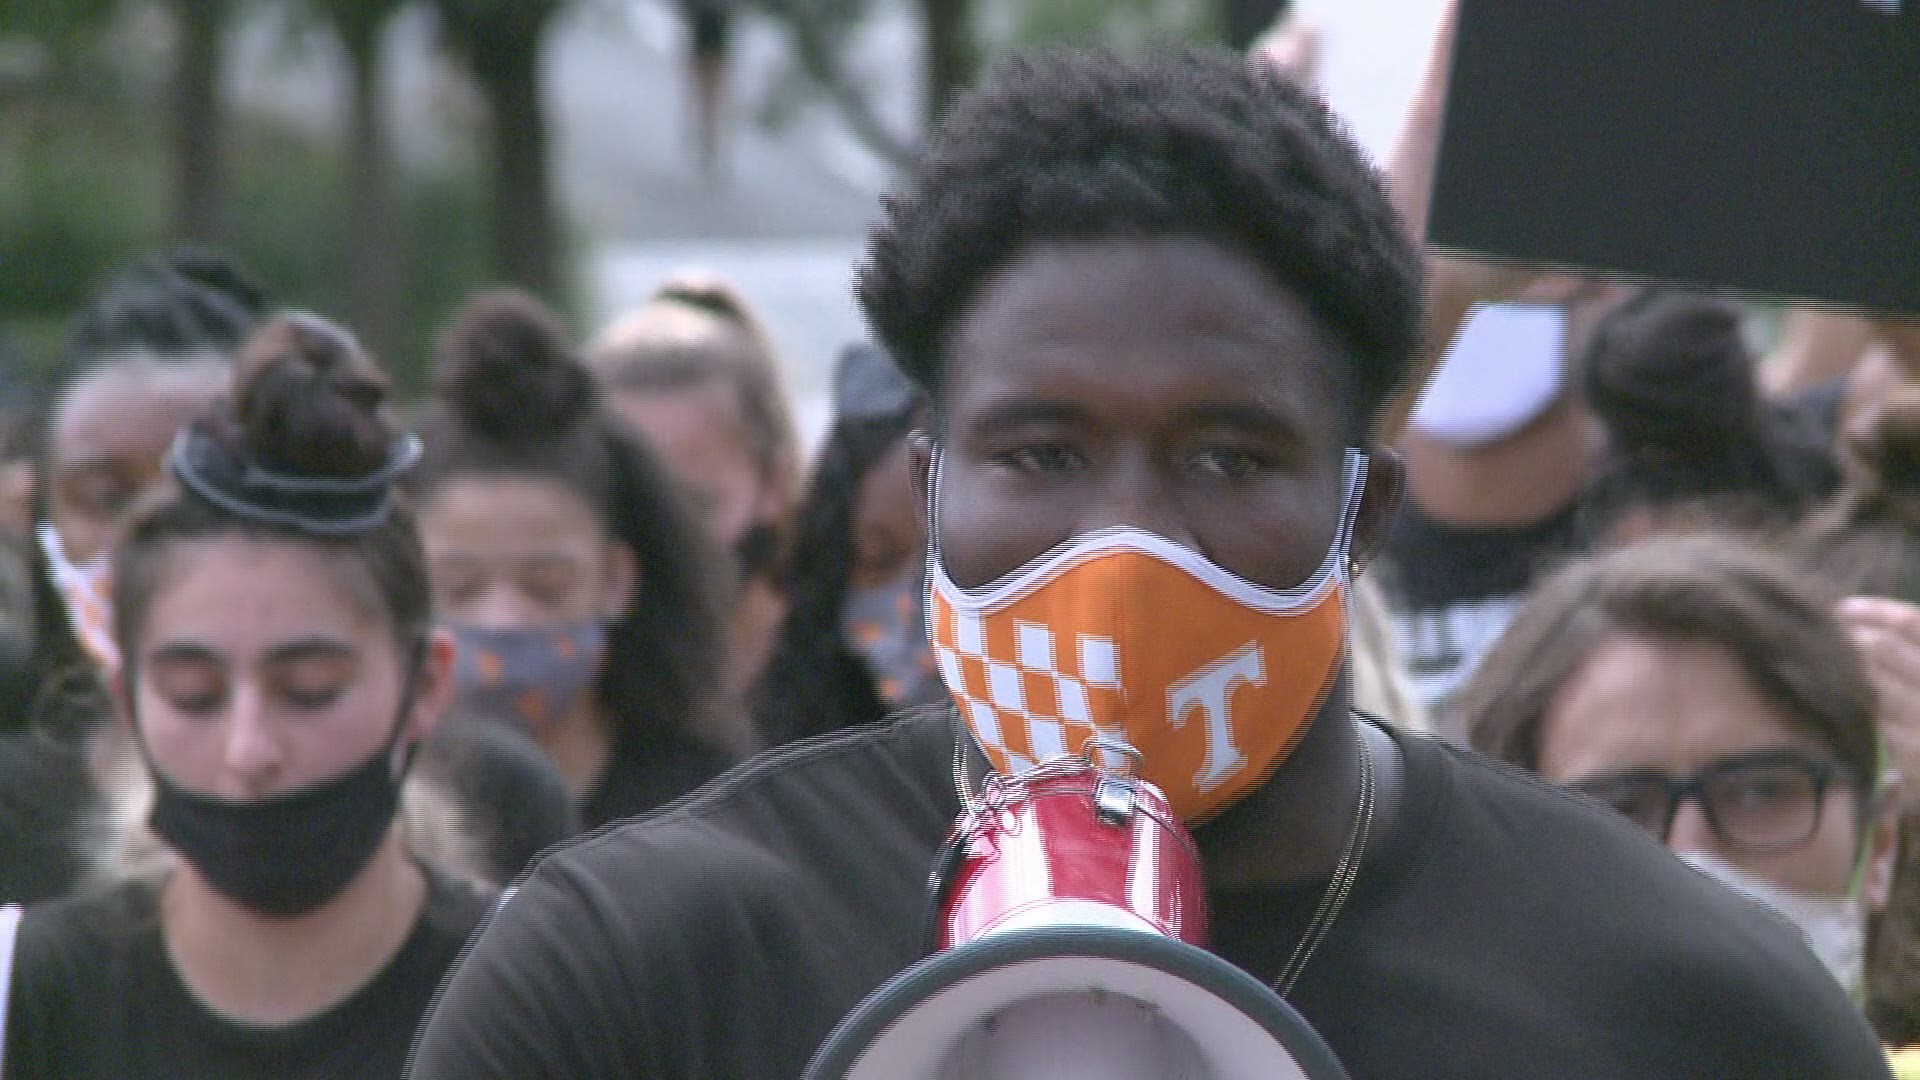 UT student-athletes led a march on campus against systemic racism Saturday. Different teams with hundreds of students, coaches and school leaders joined in.